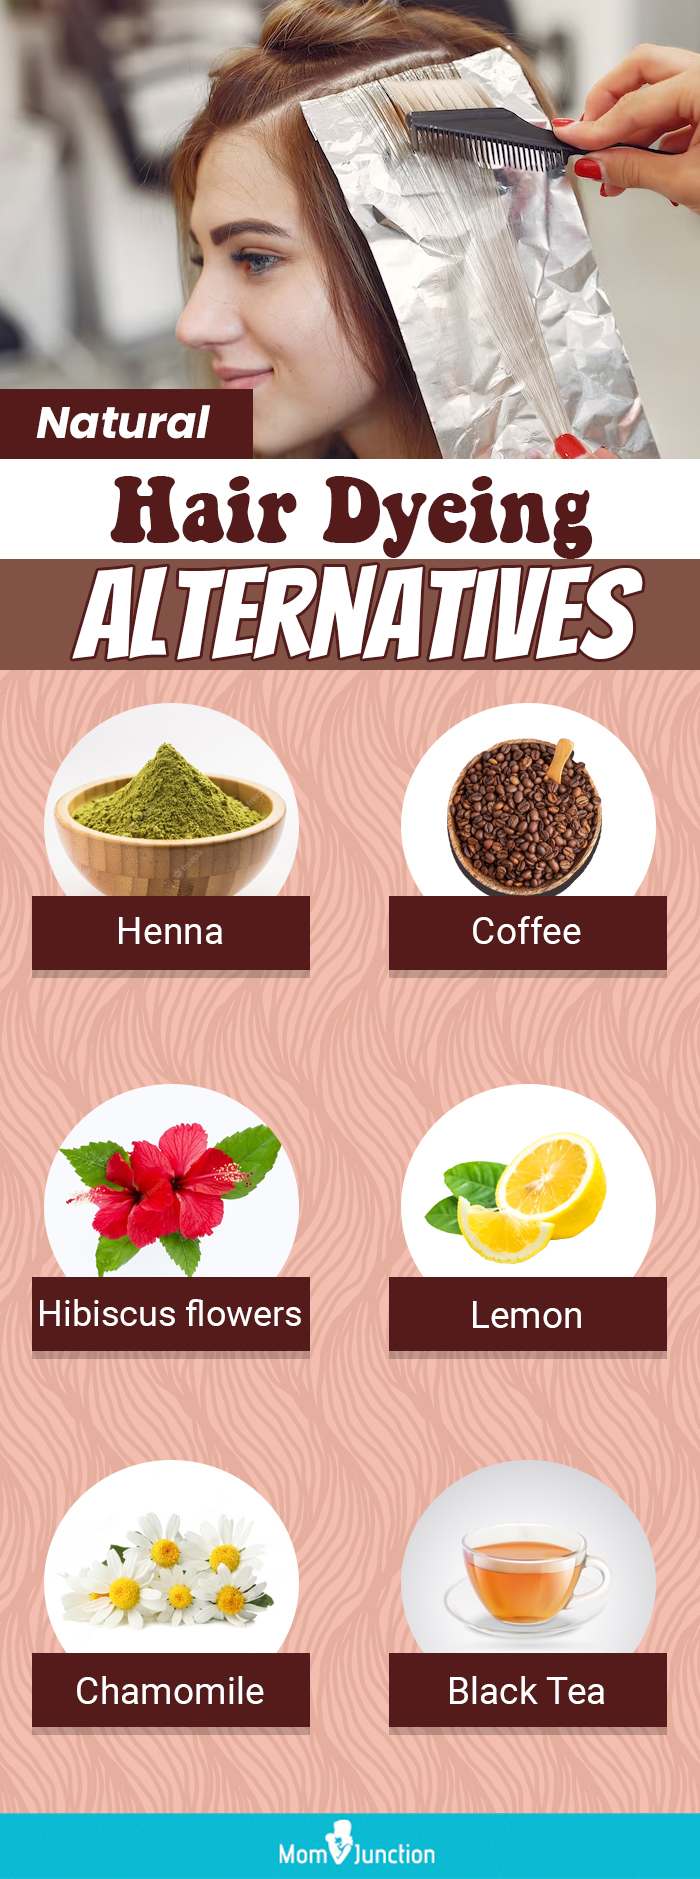 natural hair dyeing alternatives (infographic)